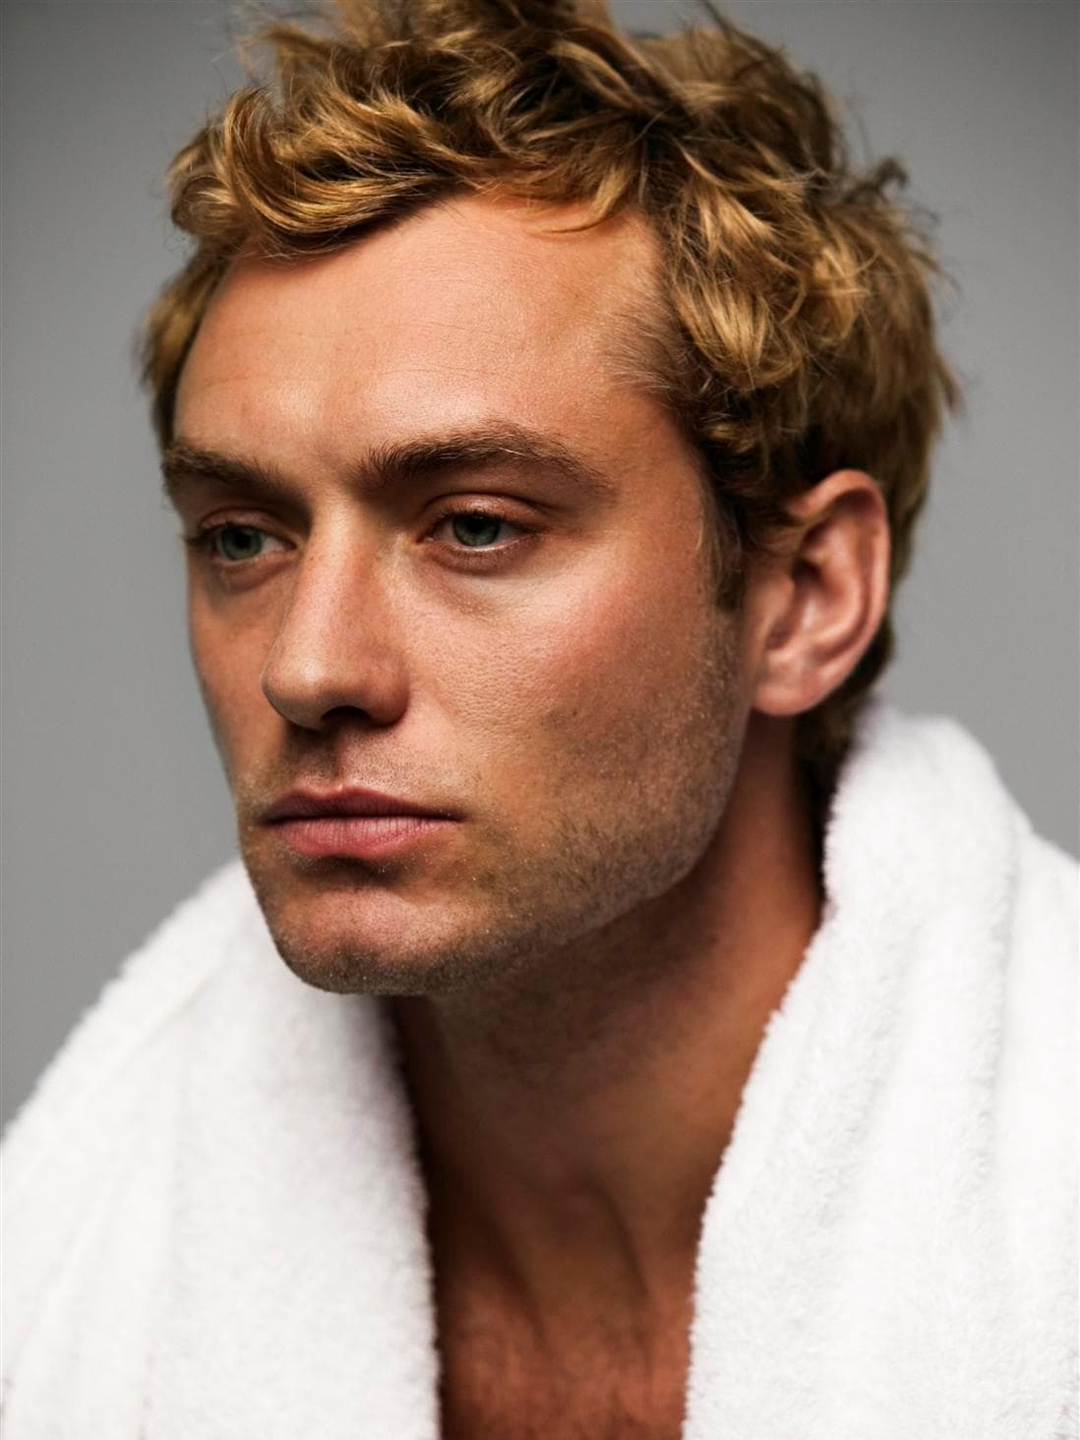 Jude Law young photos